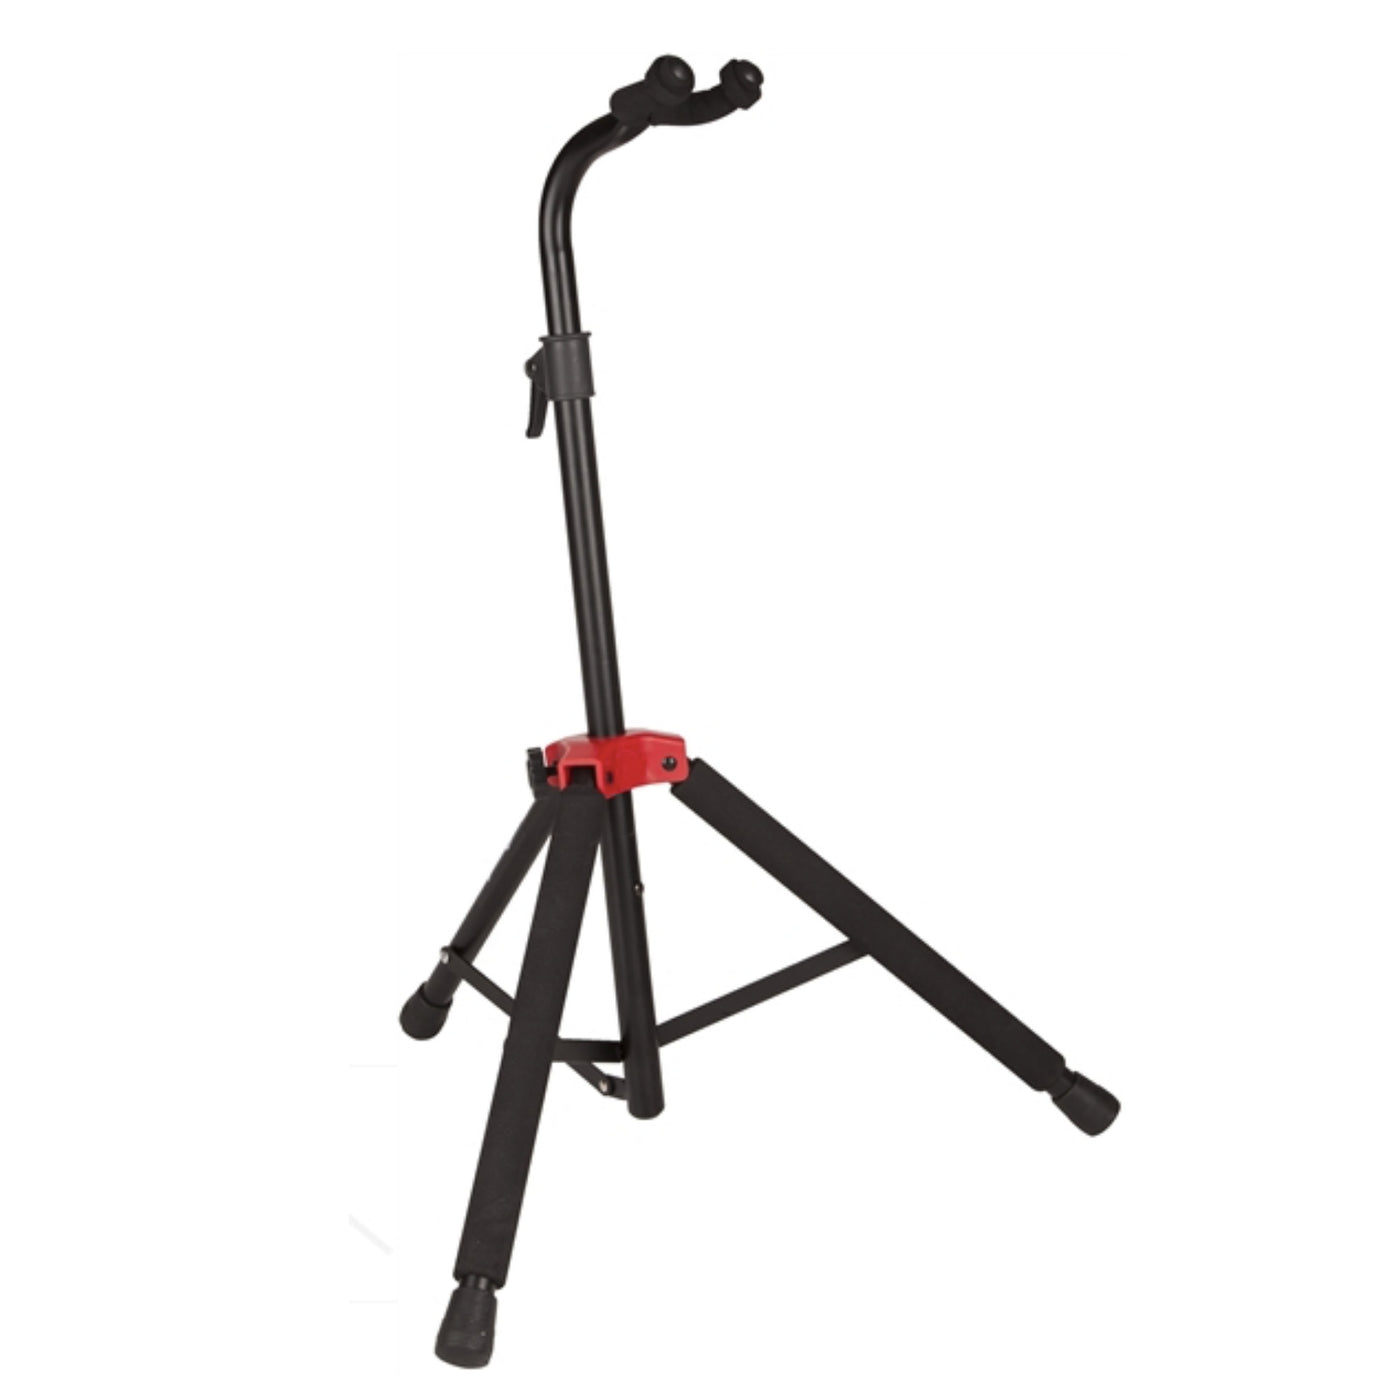 Fender Deluxe Hanging Guitar Stand, Black/Red (0991803000)